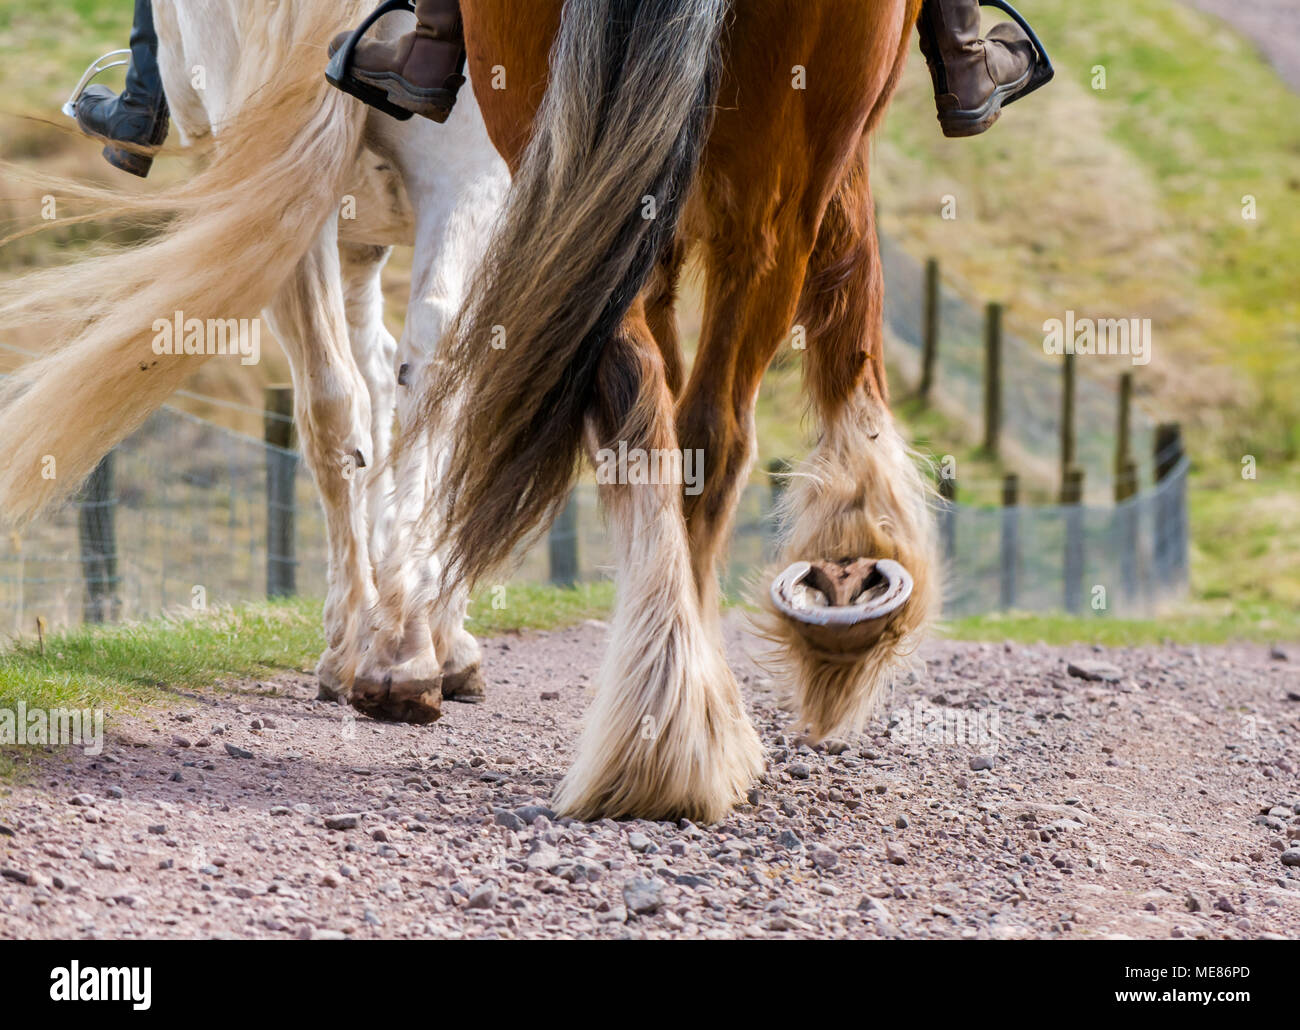 West Linton, Scottish Borders, Scotland, United Kingdom, April 21st 2018.  Spring sunshine in the countryside, horse riders on a track. Close up of Clydesdale horse hooves in motion and swinging tails Stock Photo